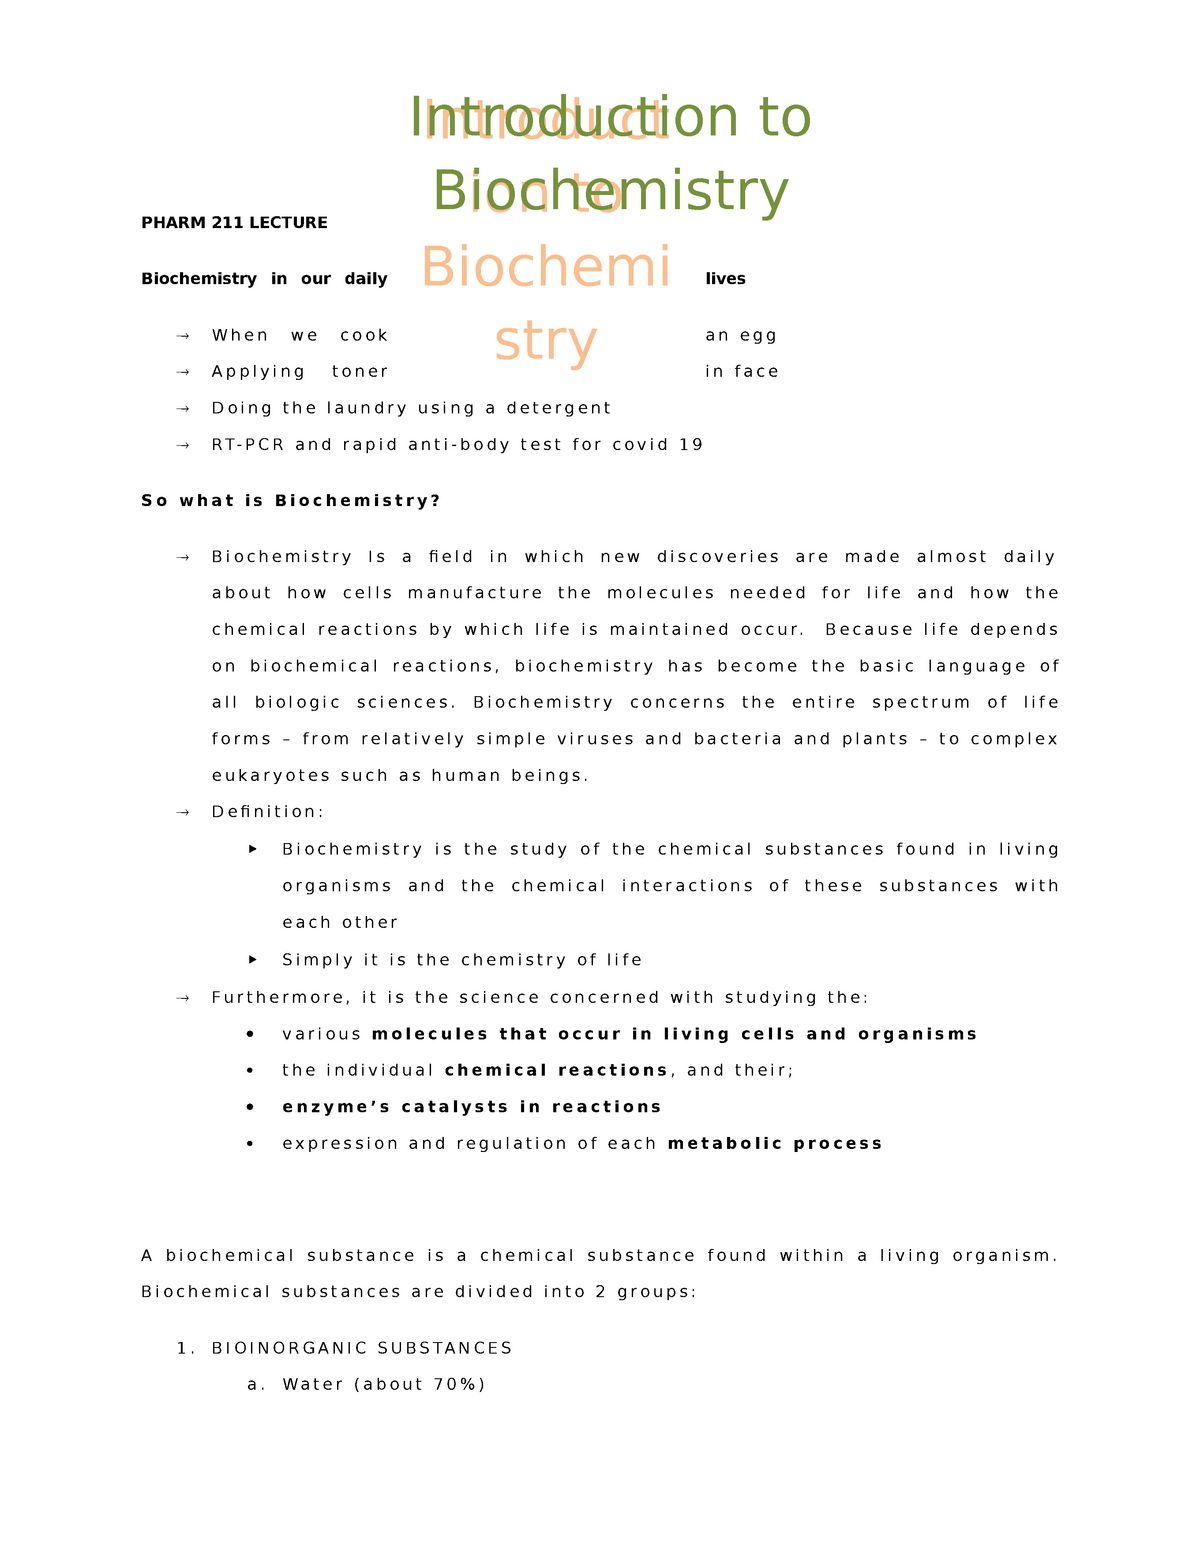 essays in biochemistry submission